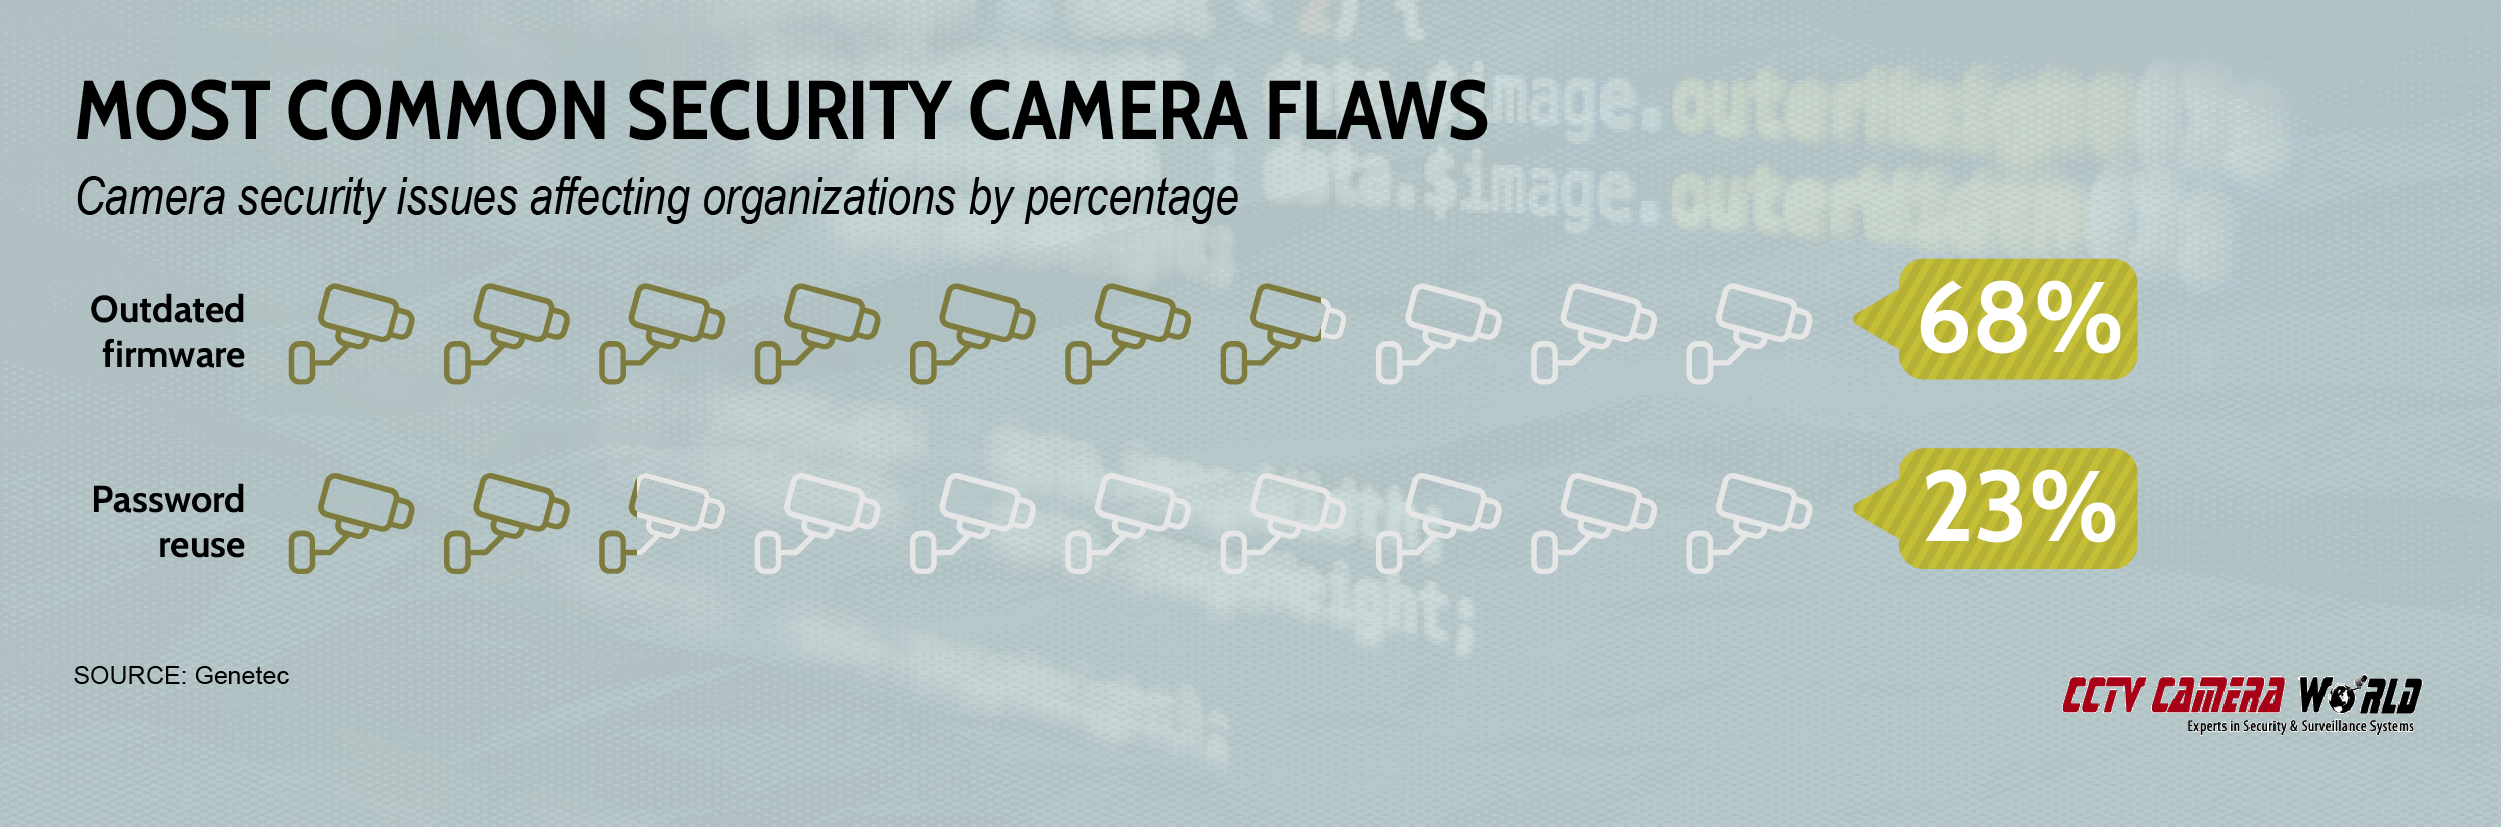 Most common security camera flaws